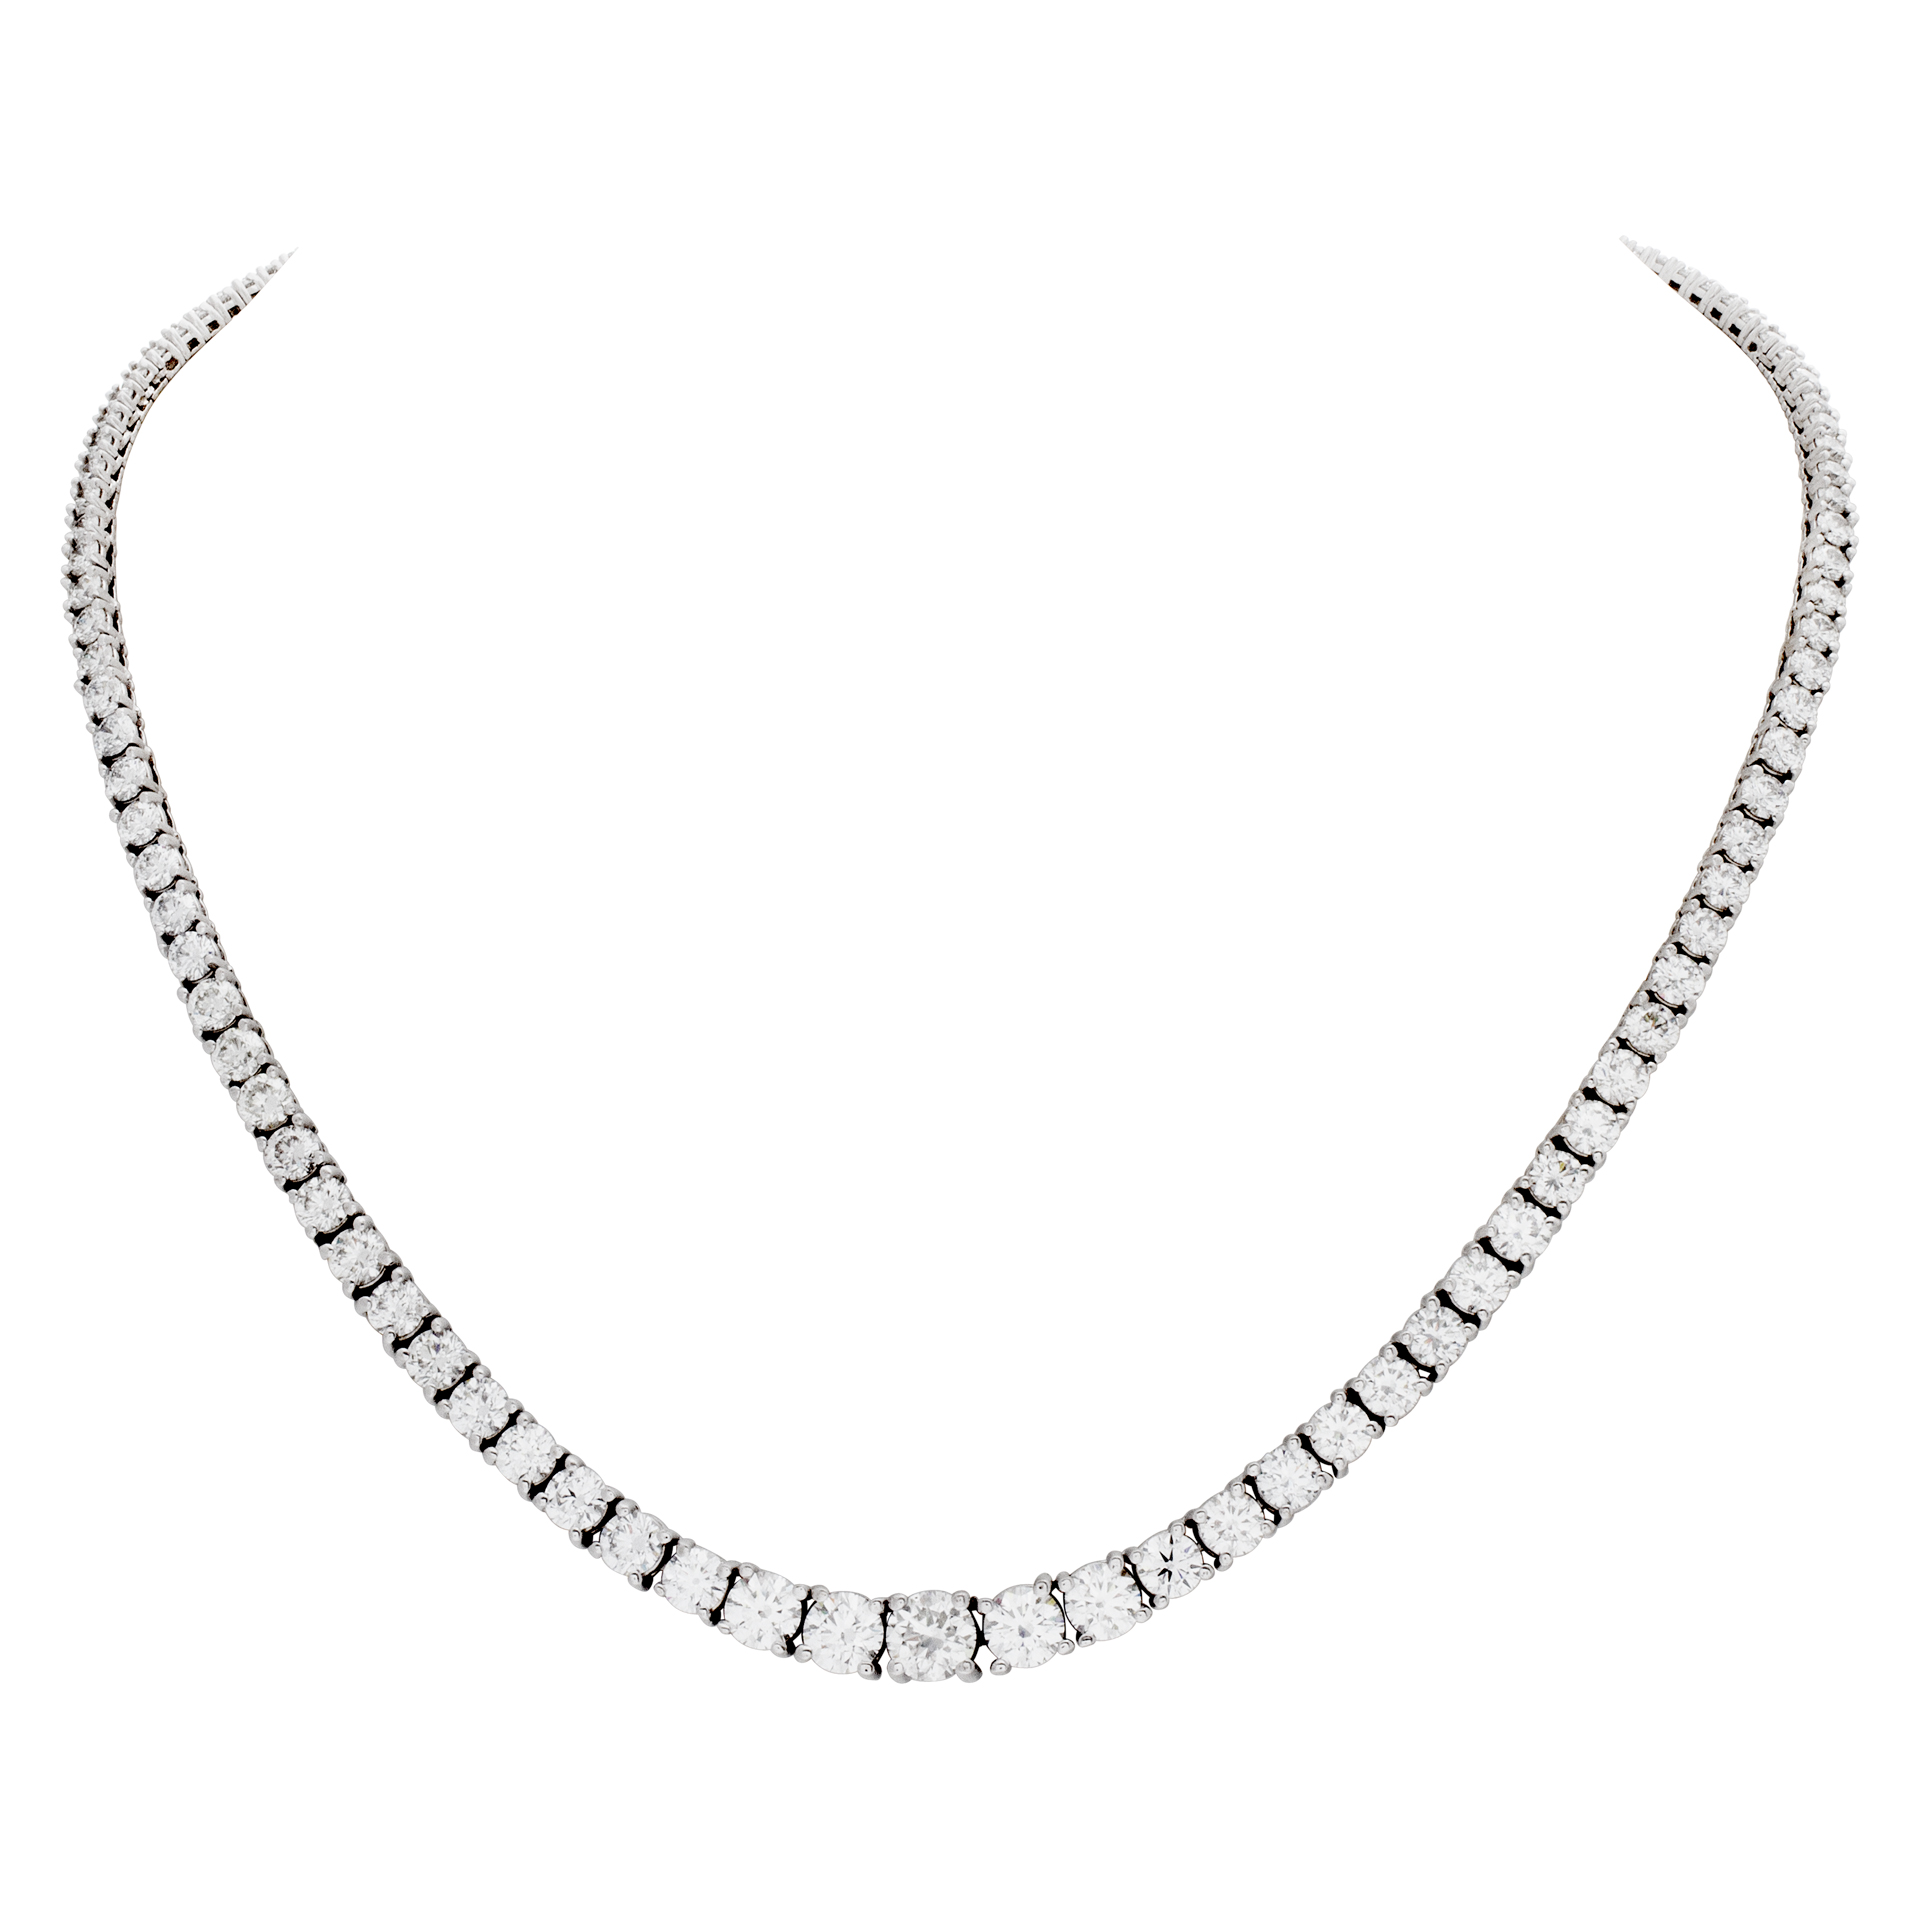 Diamond Riviera necklace with center GIA certified diamond (0.90 carat) and over 17.73 carats full cut round brilliant diamonds, in 18k White gold